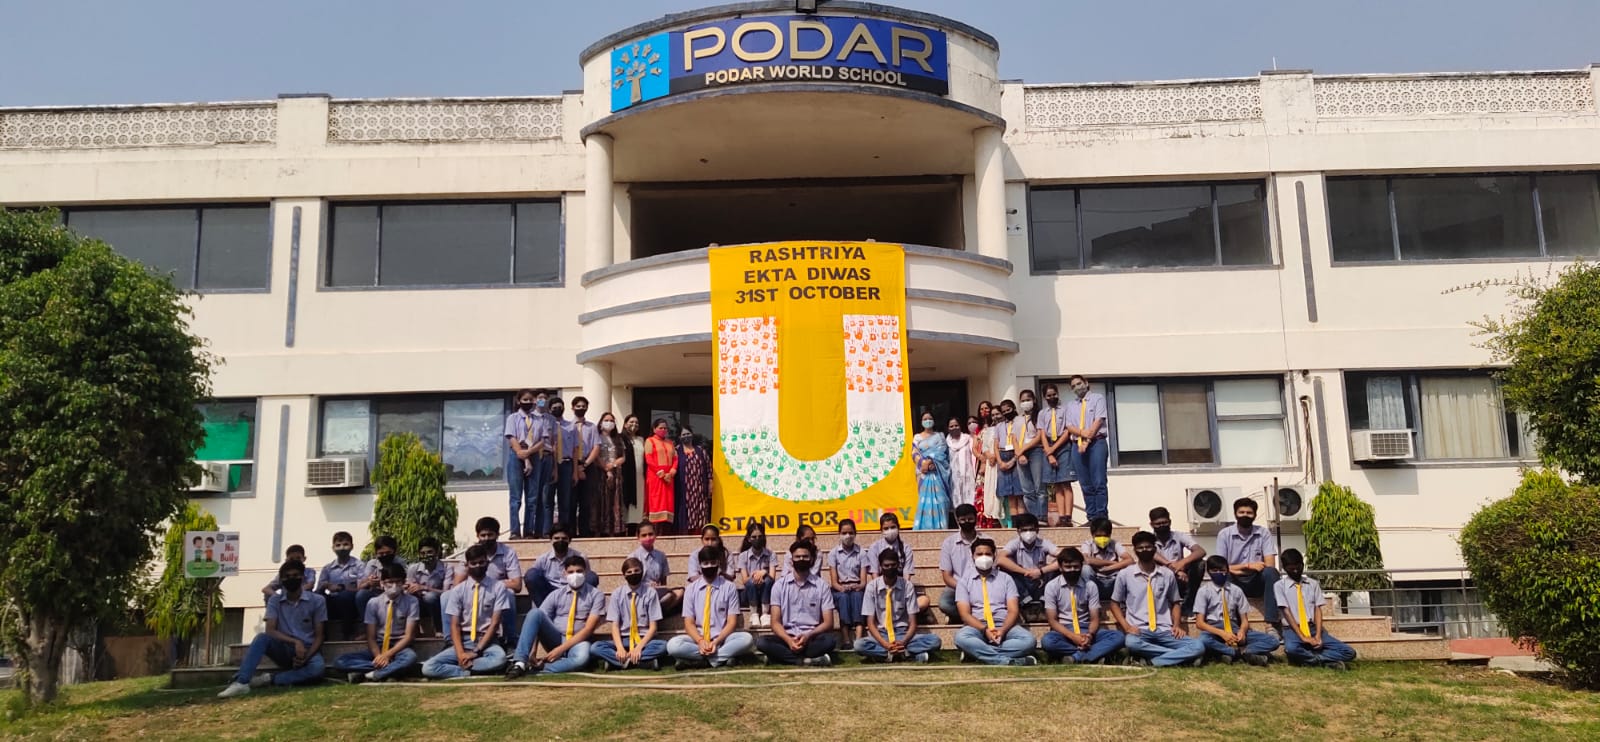 students-of-podar-world-schools-celebrated-the-national-unity-day-by-making-a-large-sized-cut-out-with-a-message-of-u-for-unity